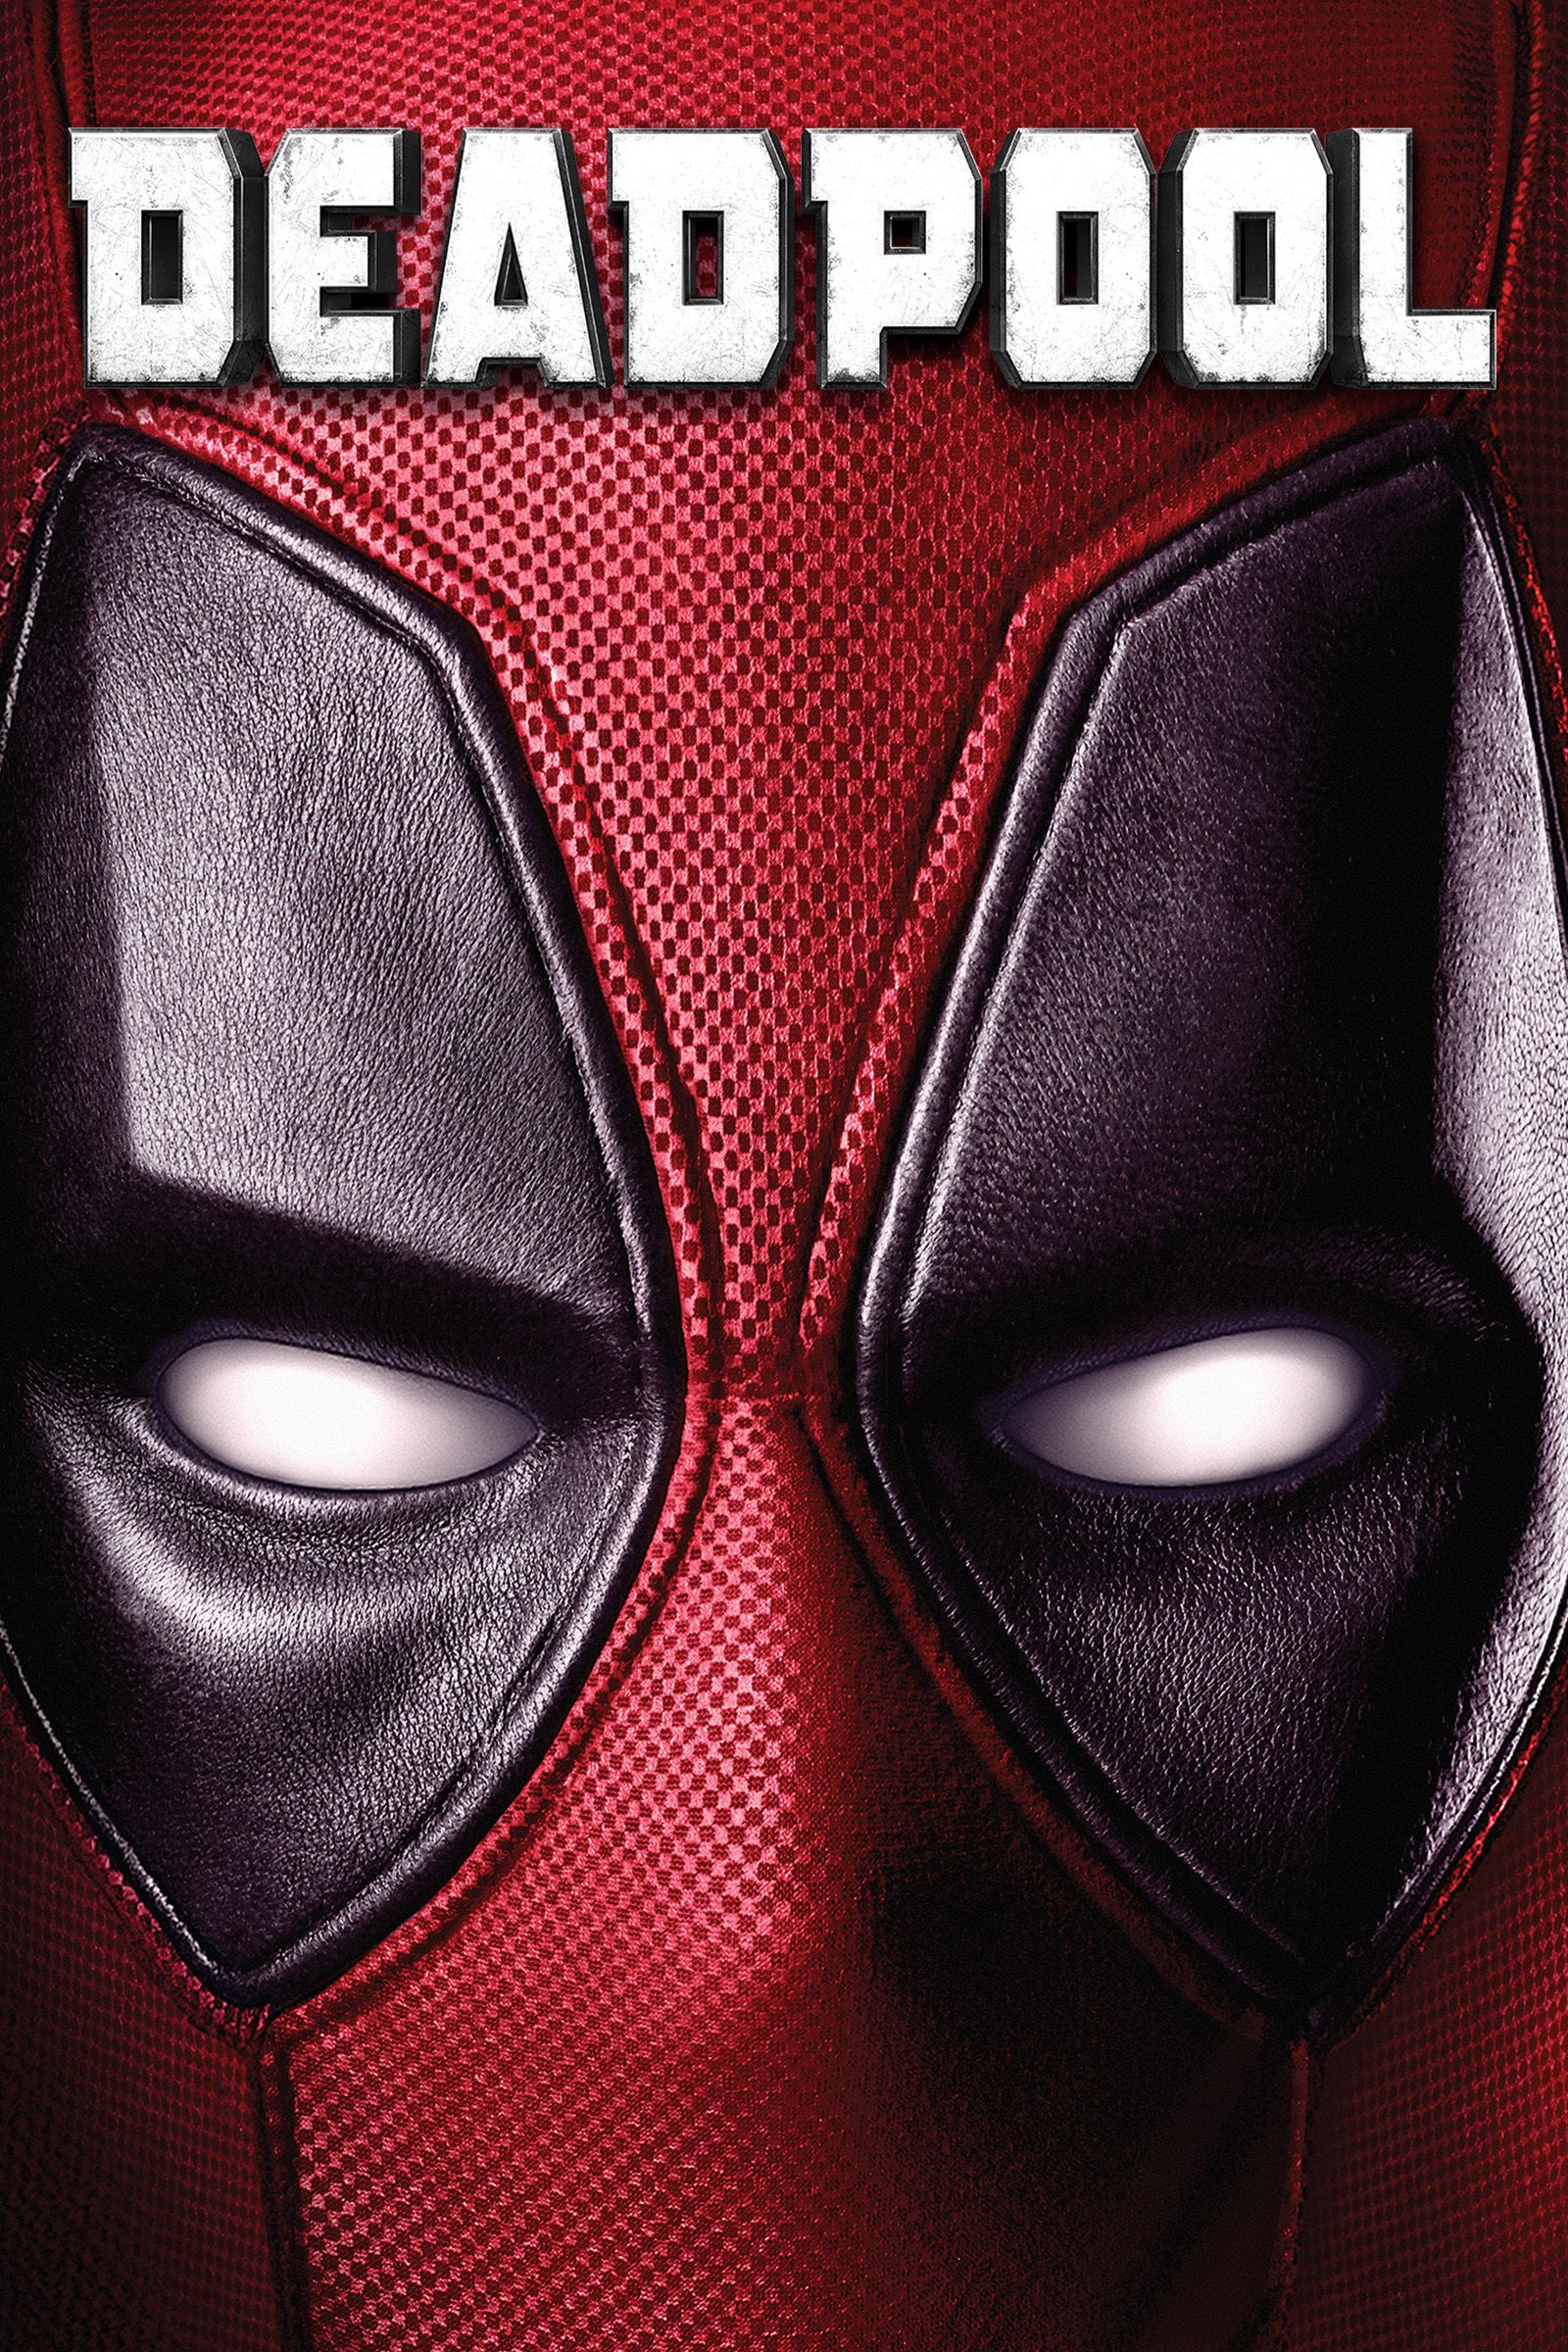 corinne morales recommends Deadpool Full Movie In Hindi